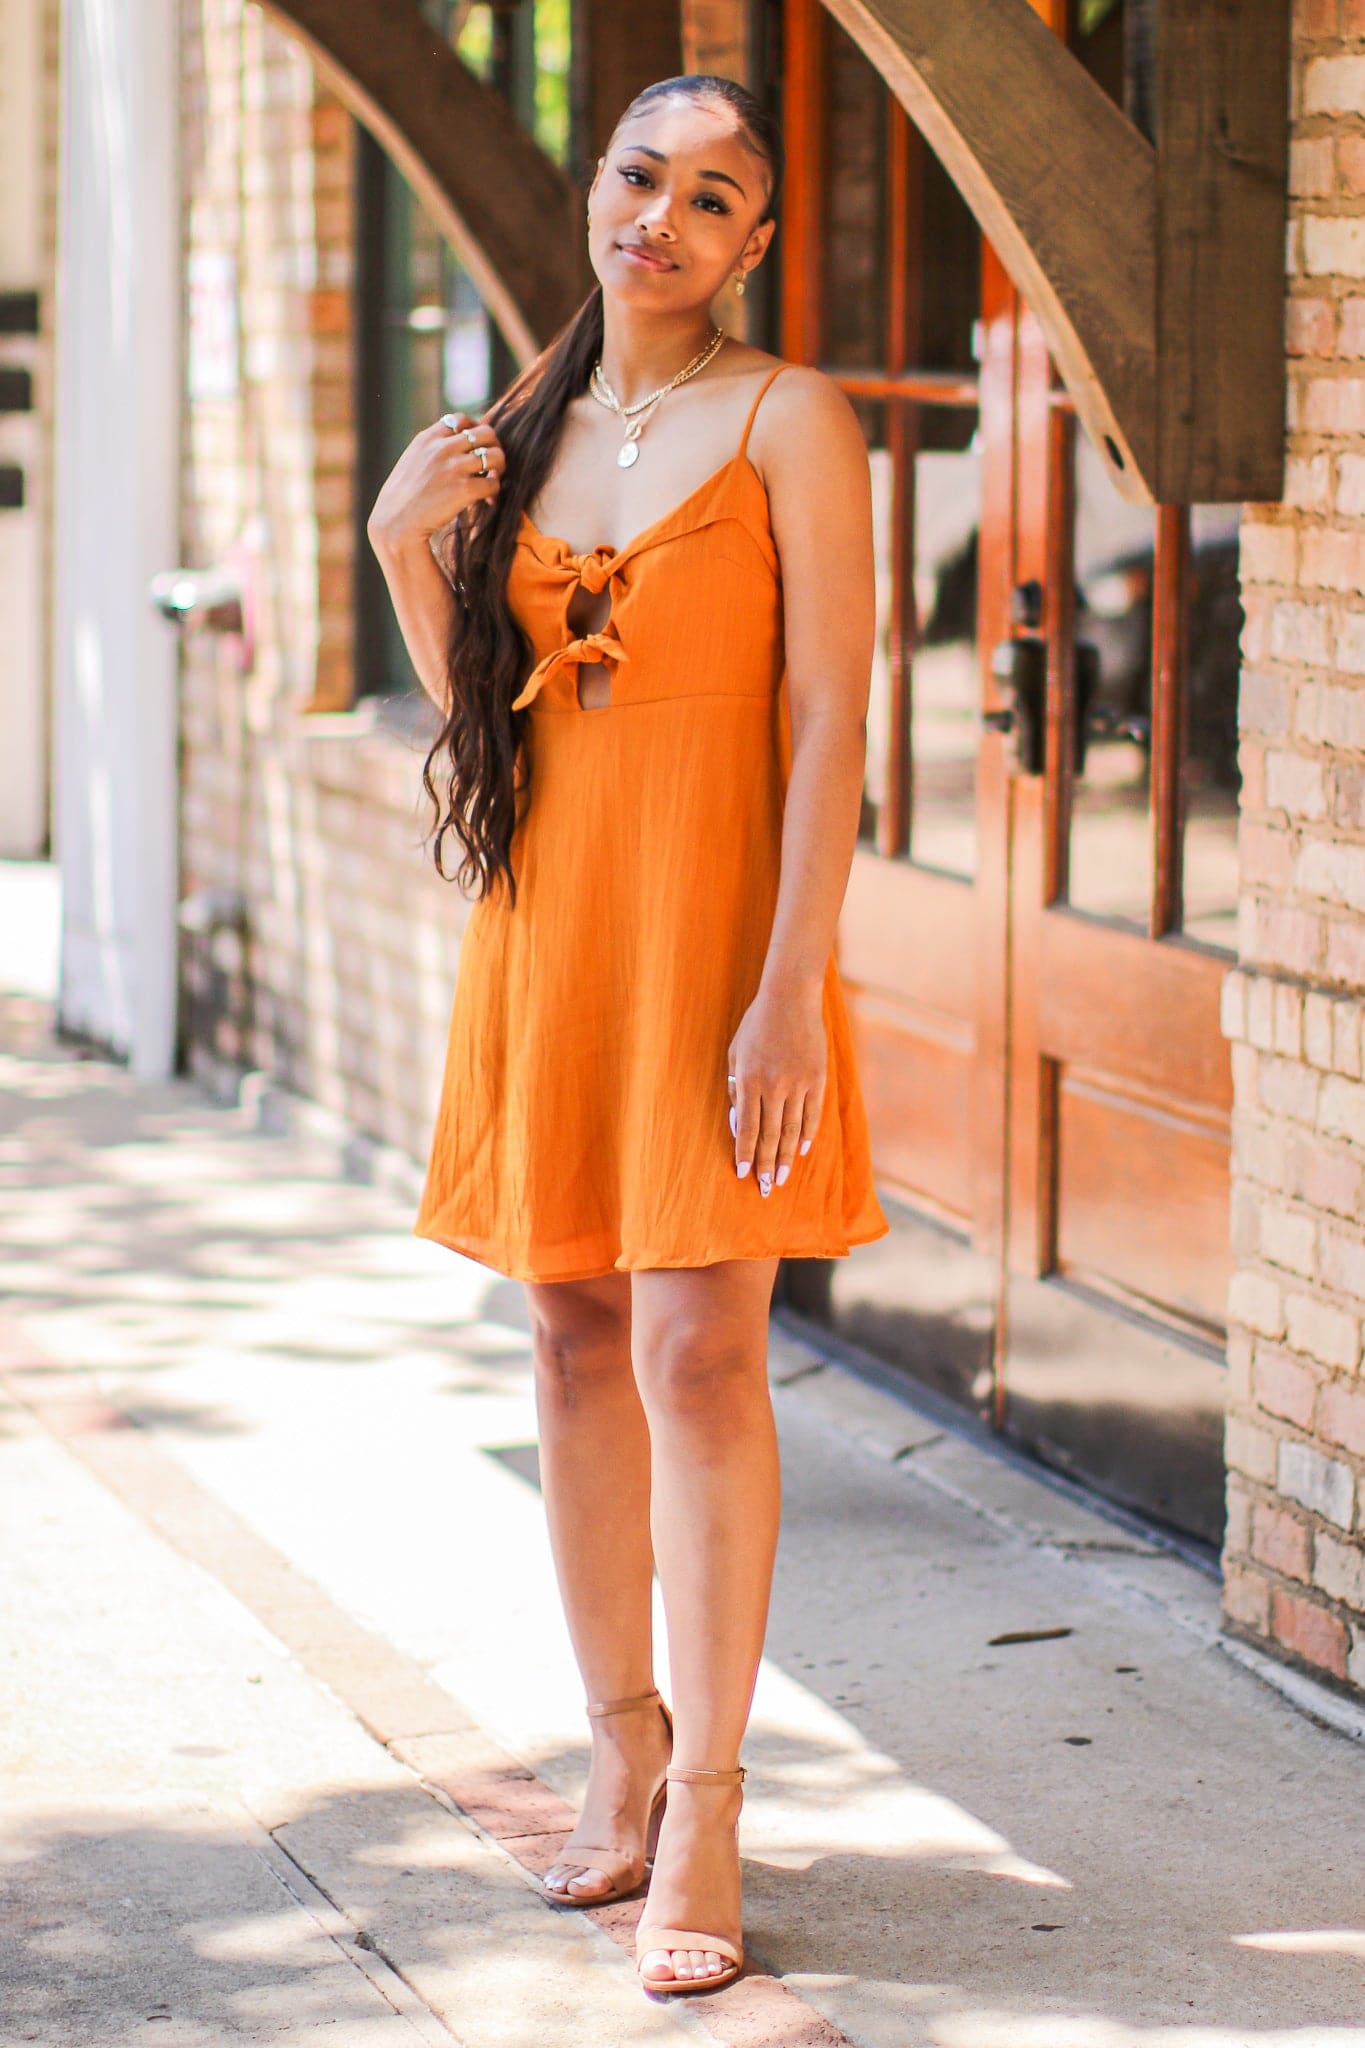  Worth a Tie Cutout Front Dress - FINAL SALE - Madison and Mallory